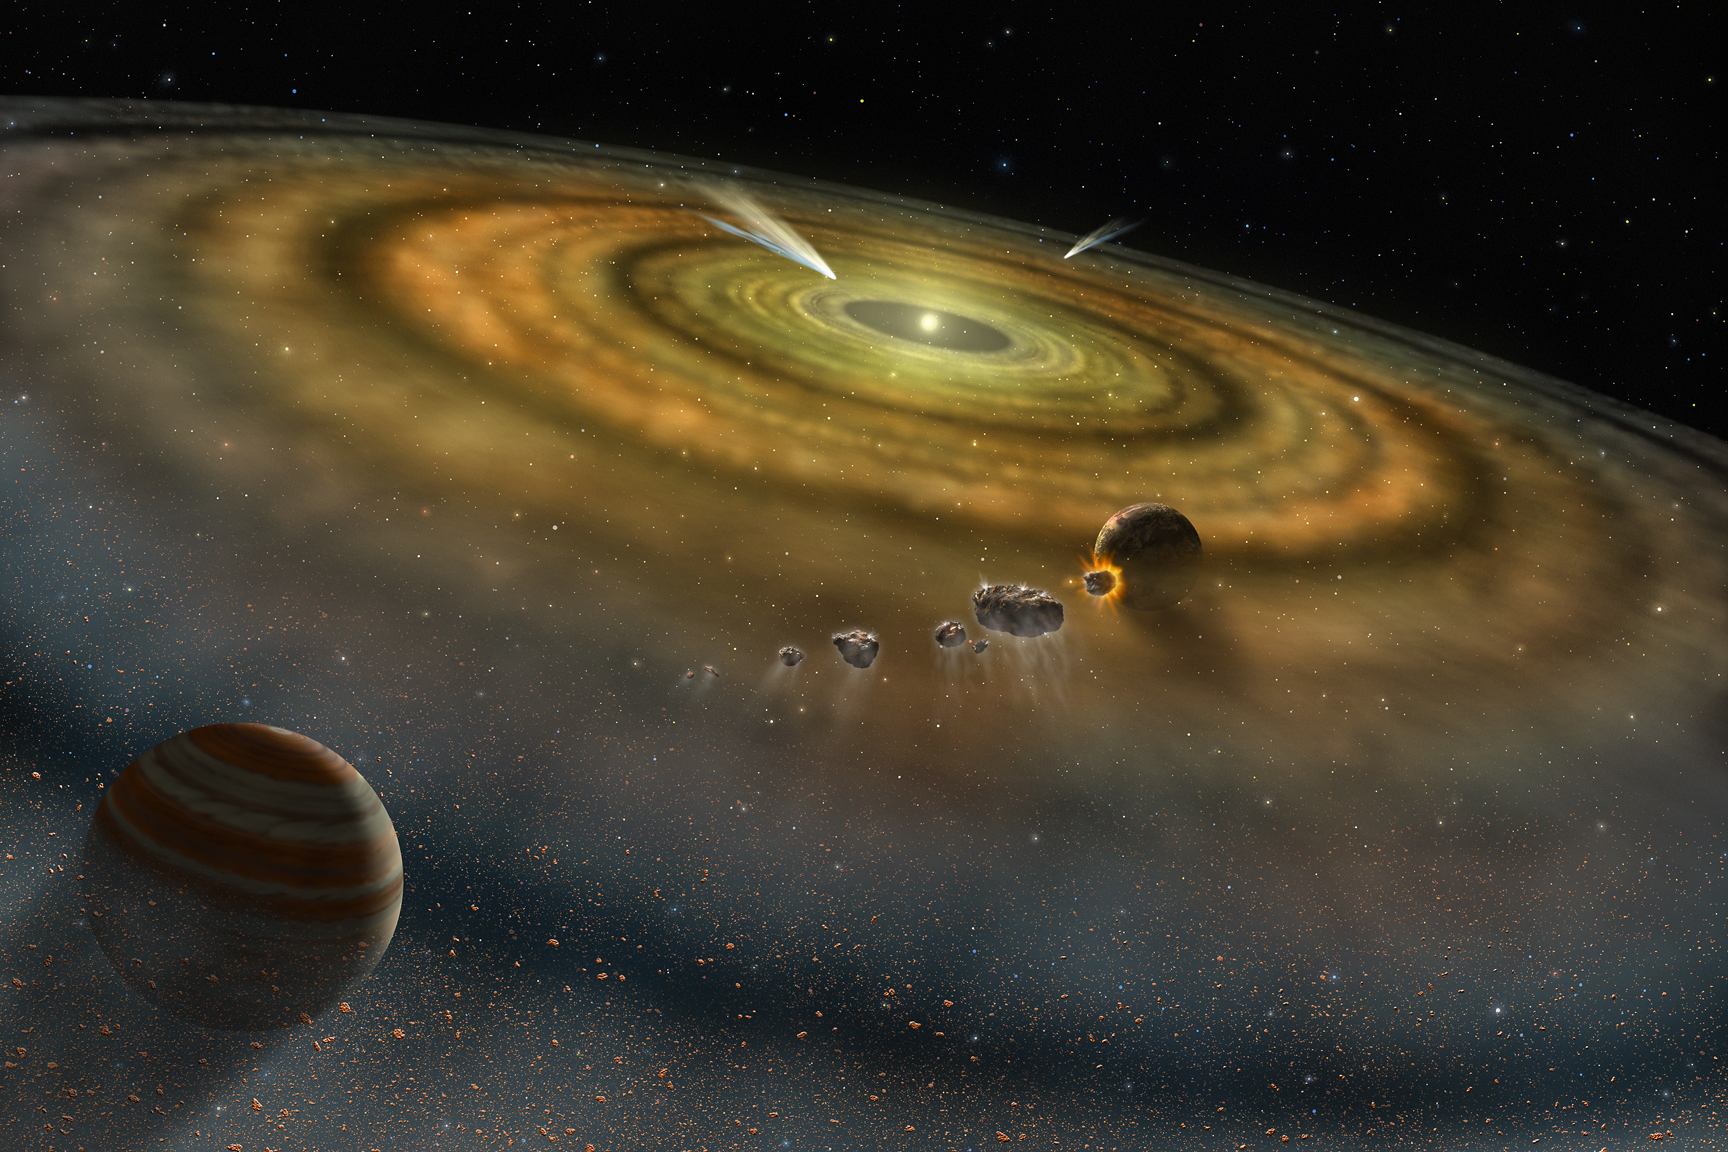 A few planets budding in a planet-forming disk around a glowing star.